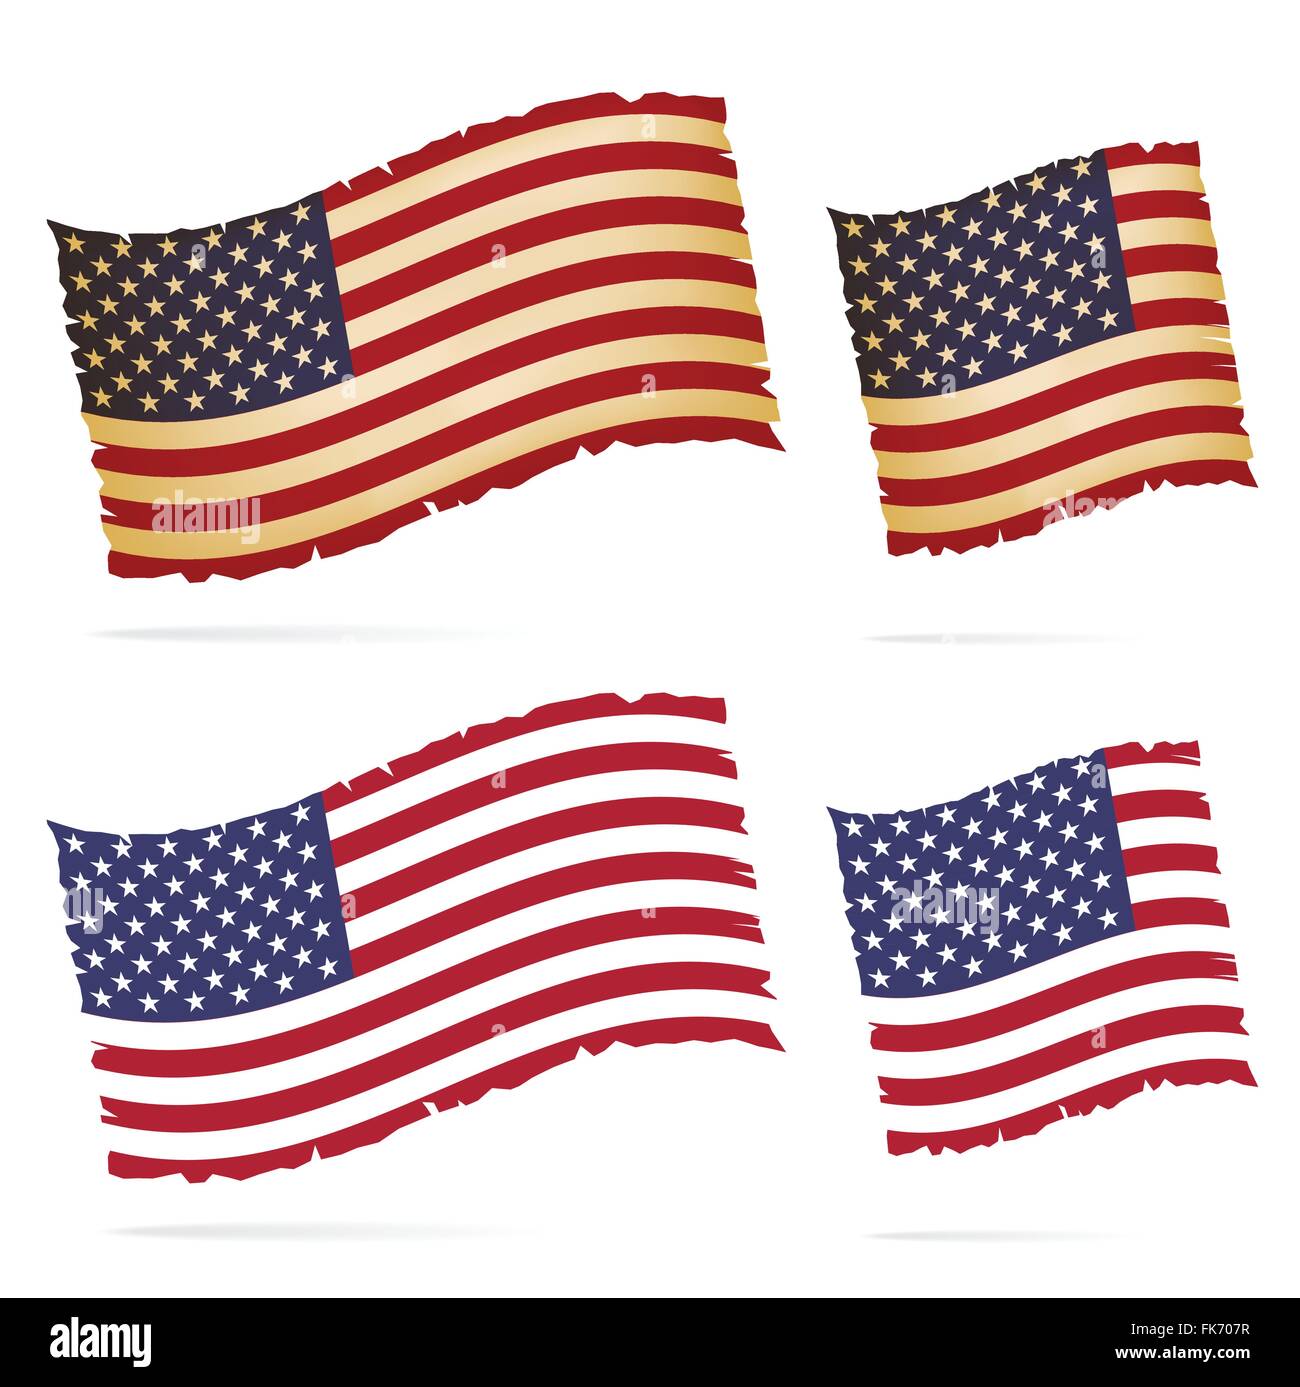 United Stated flag.vector illustration Stock Vector